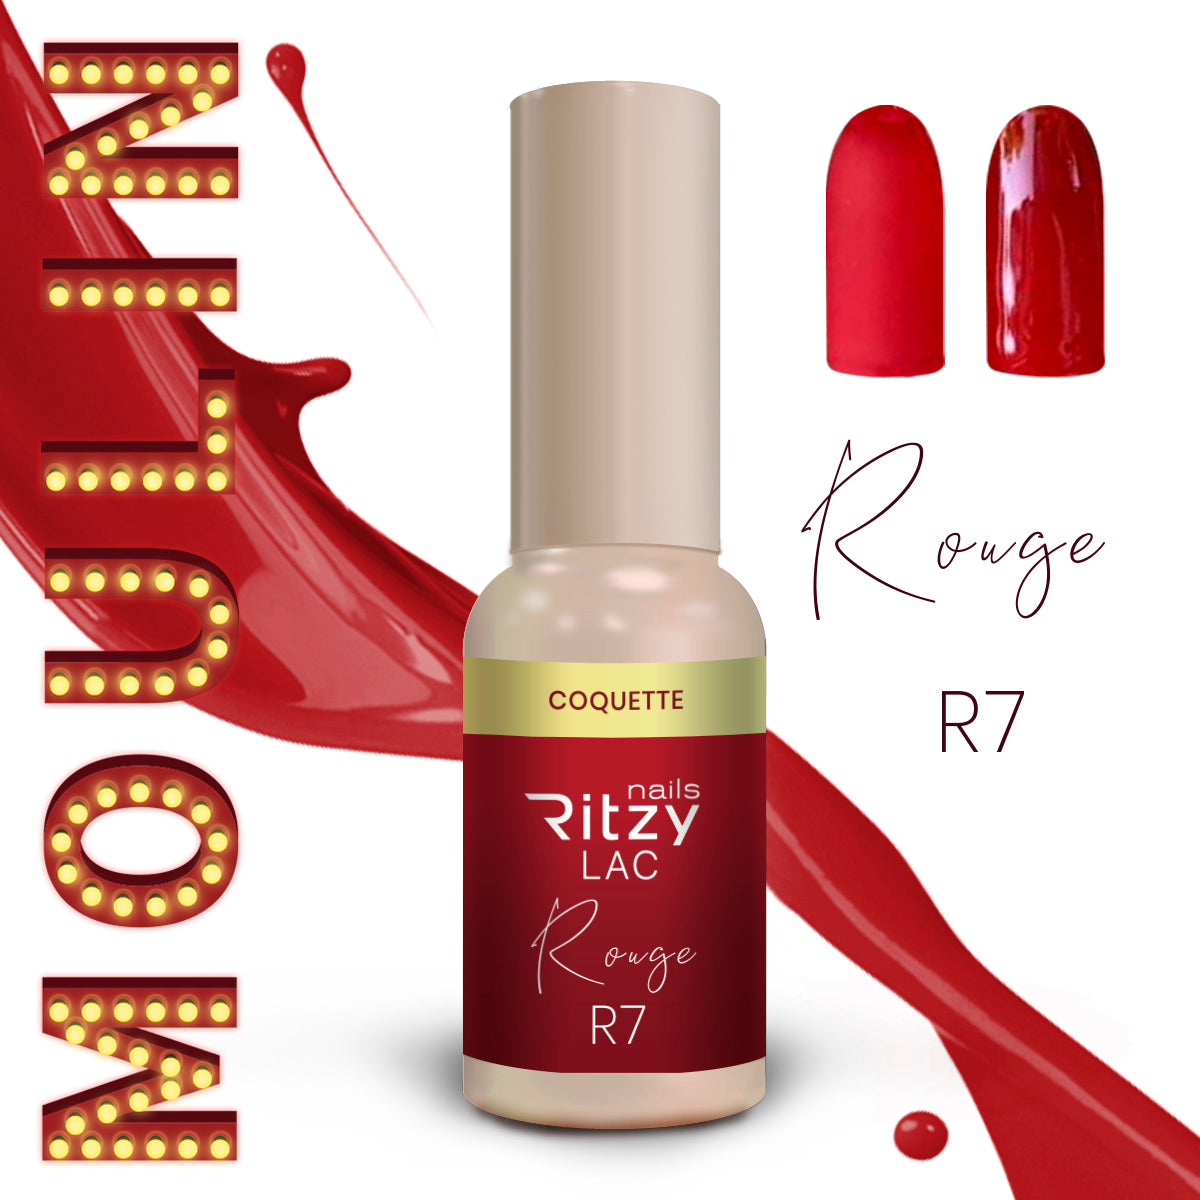 Ritzy Nails “Moulin Rouge ”collection of 10x 9ml colors.